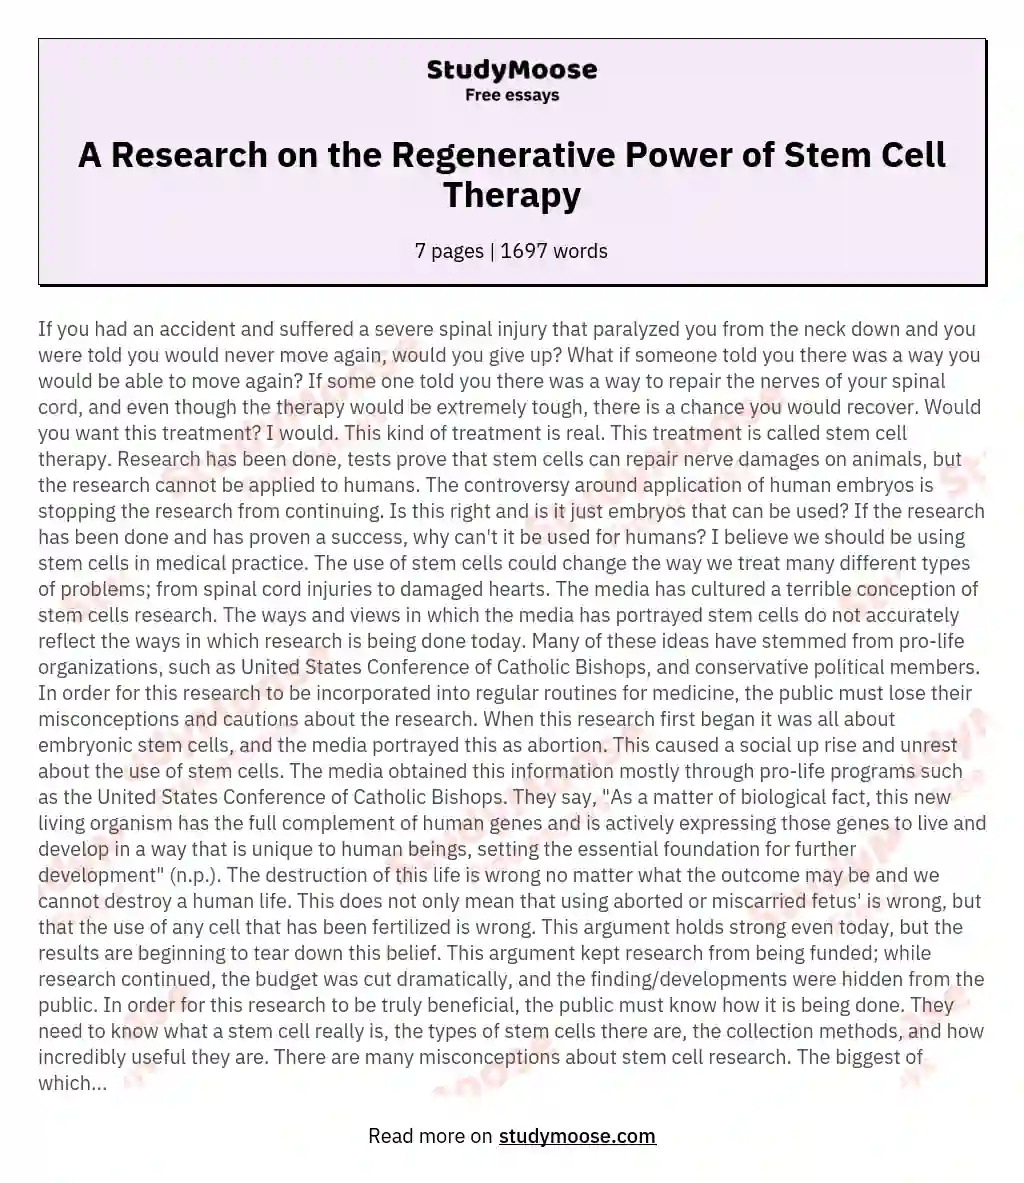 A Research on the Regenerative Power of Stem Cell Therapy essay